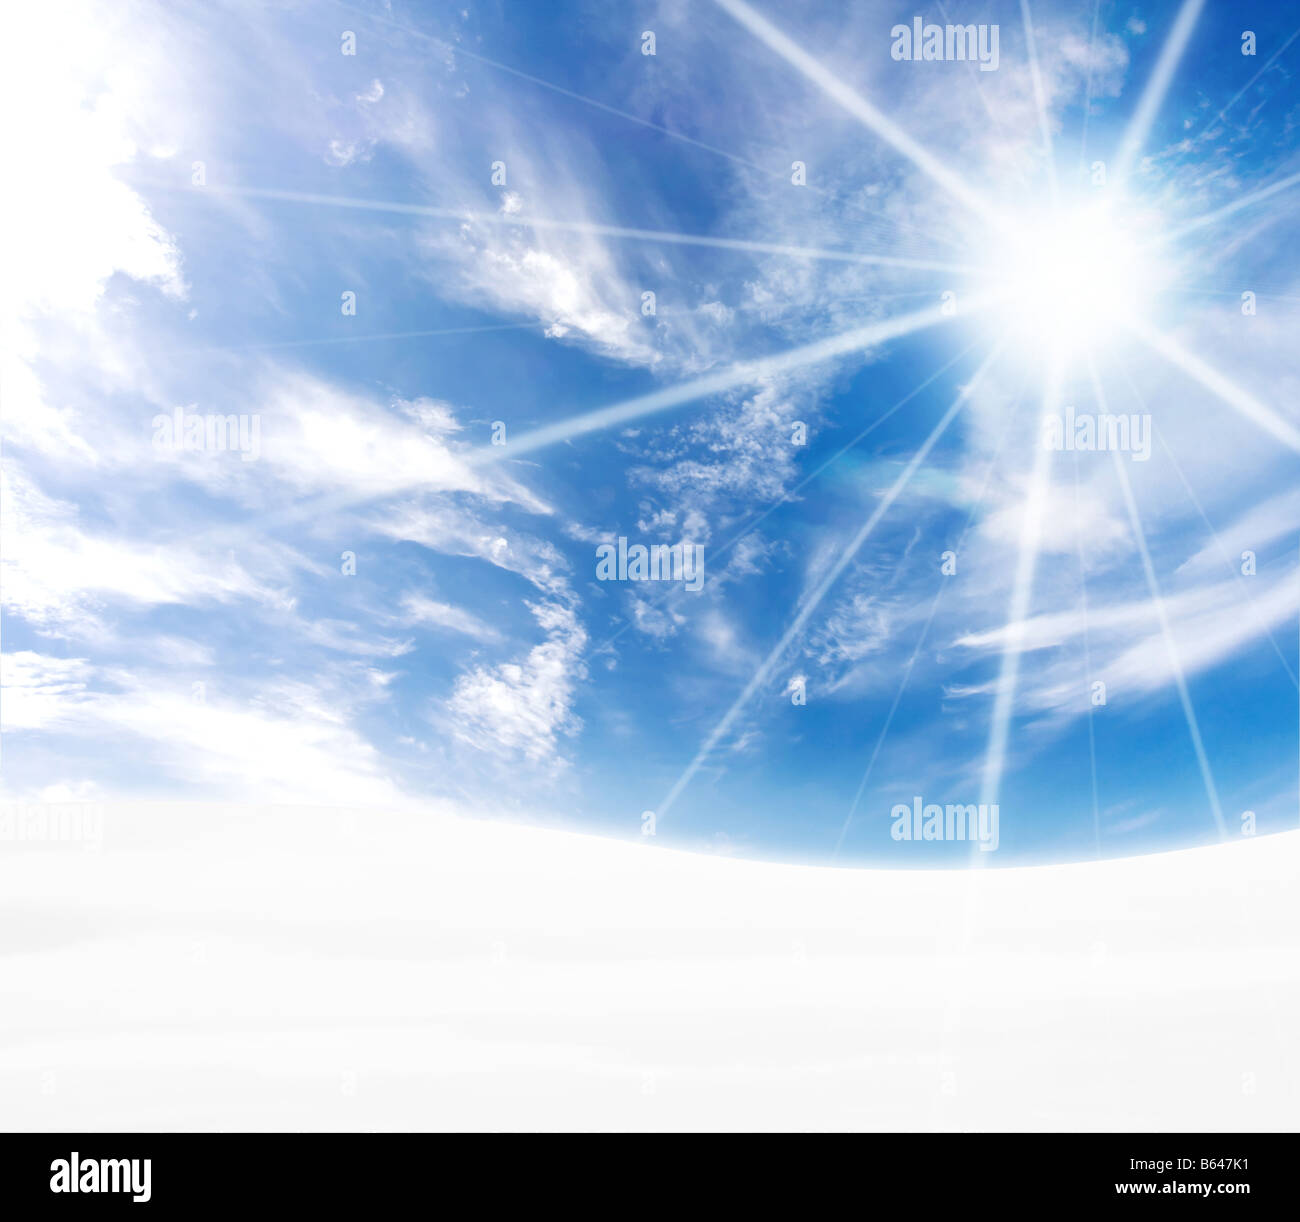 A simple tranquil beautiful S curved horizon with blue sky and winter snow Freezing feel with sun flare Stock Photo